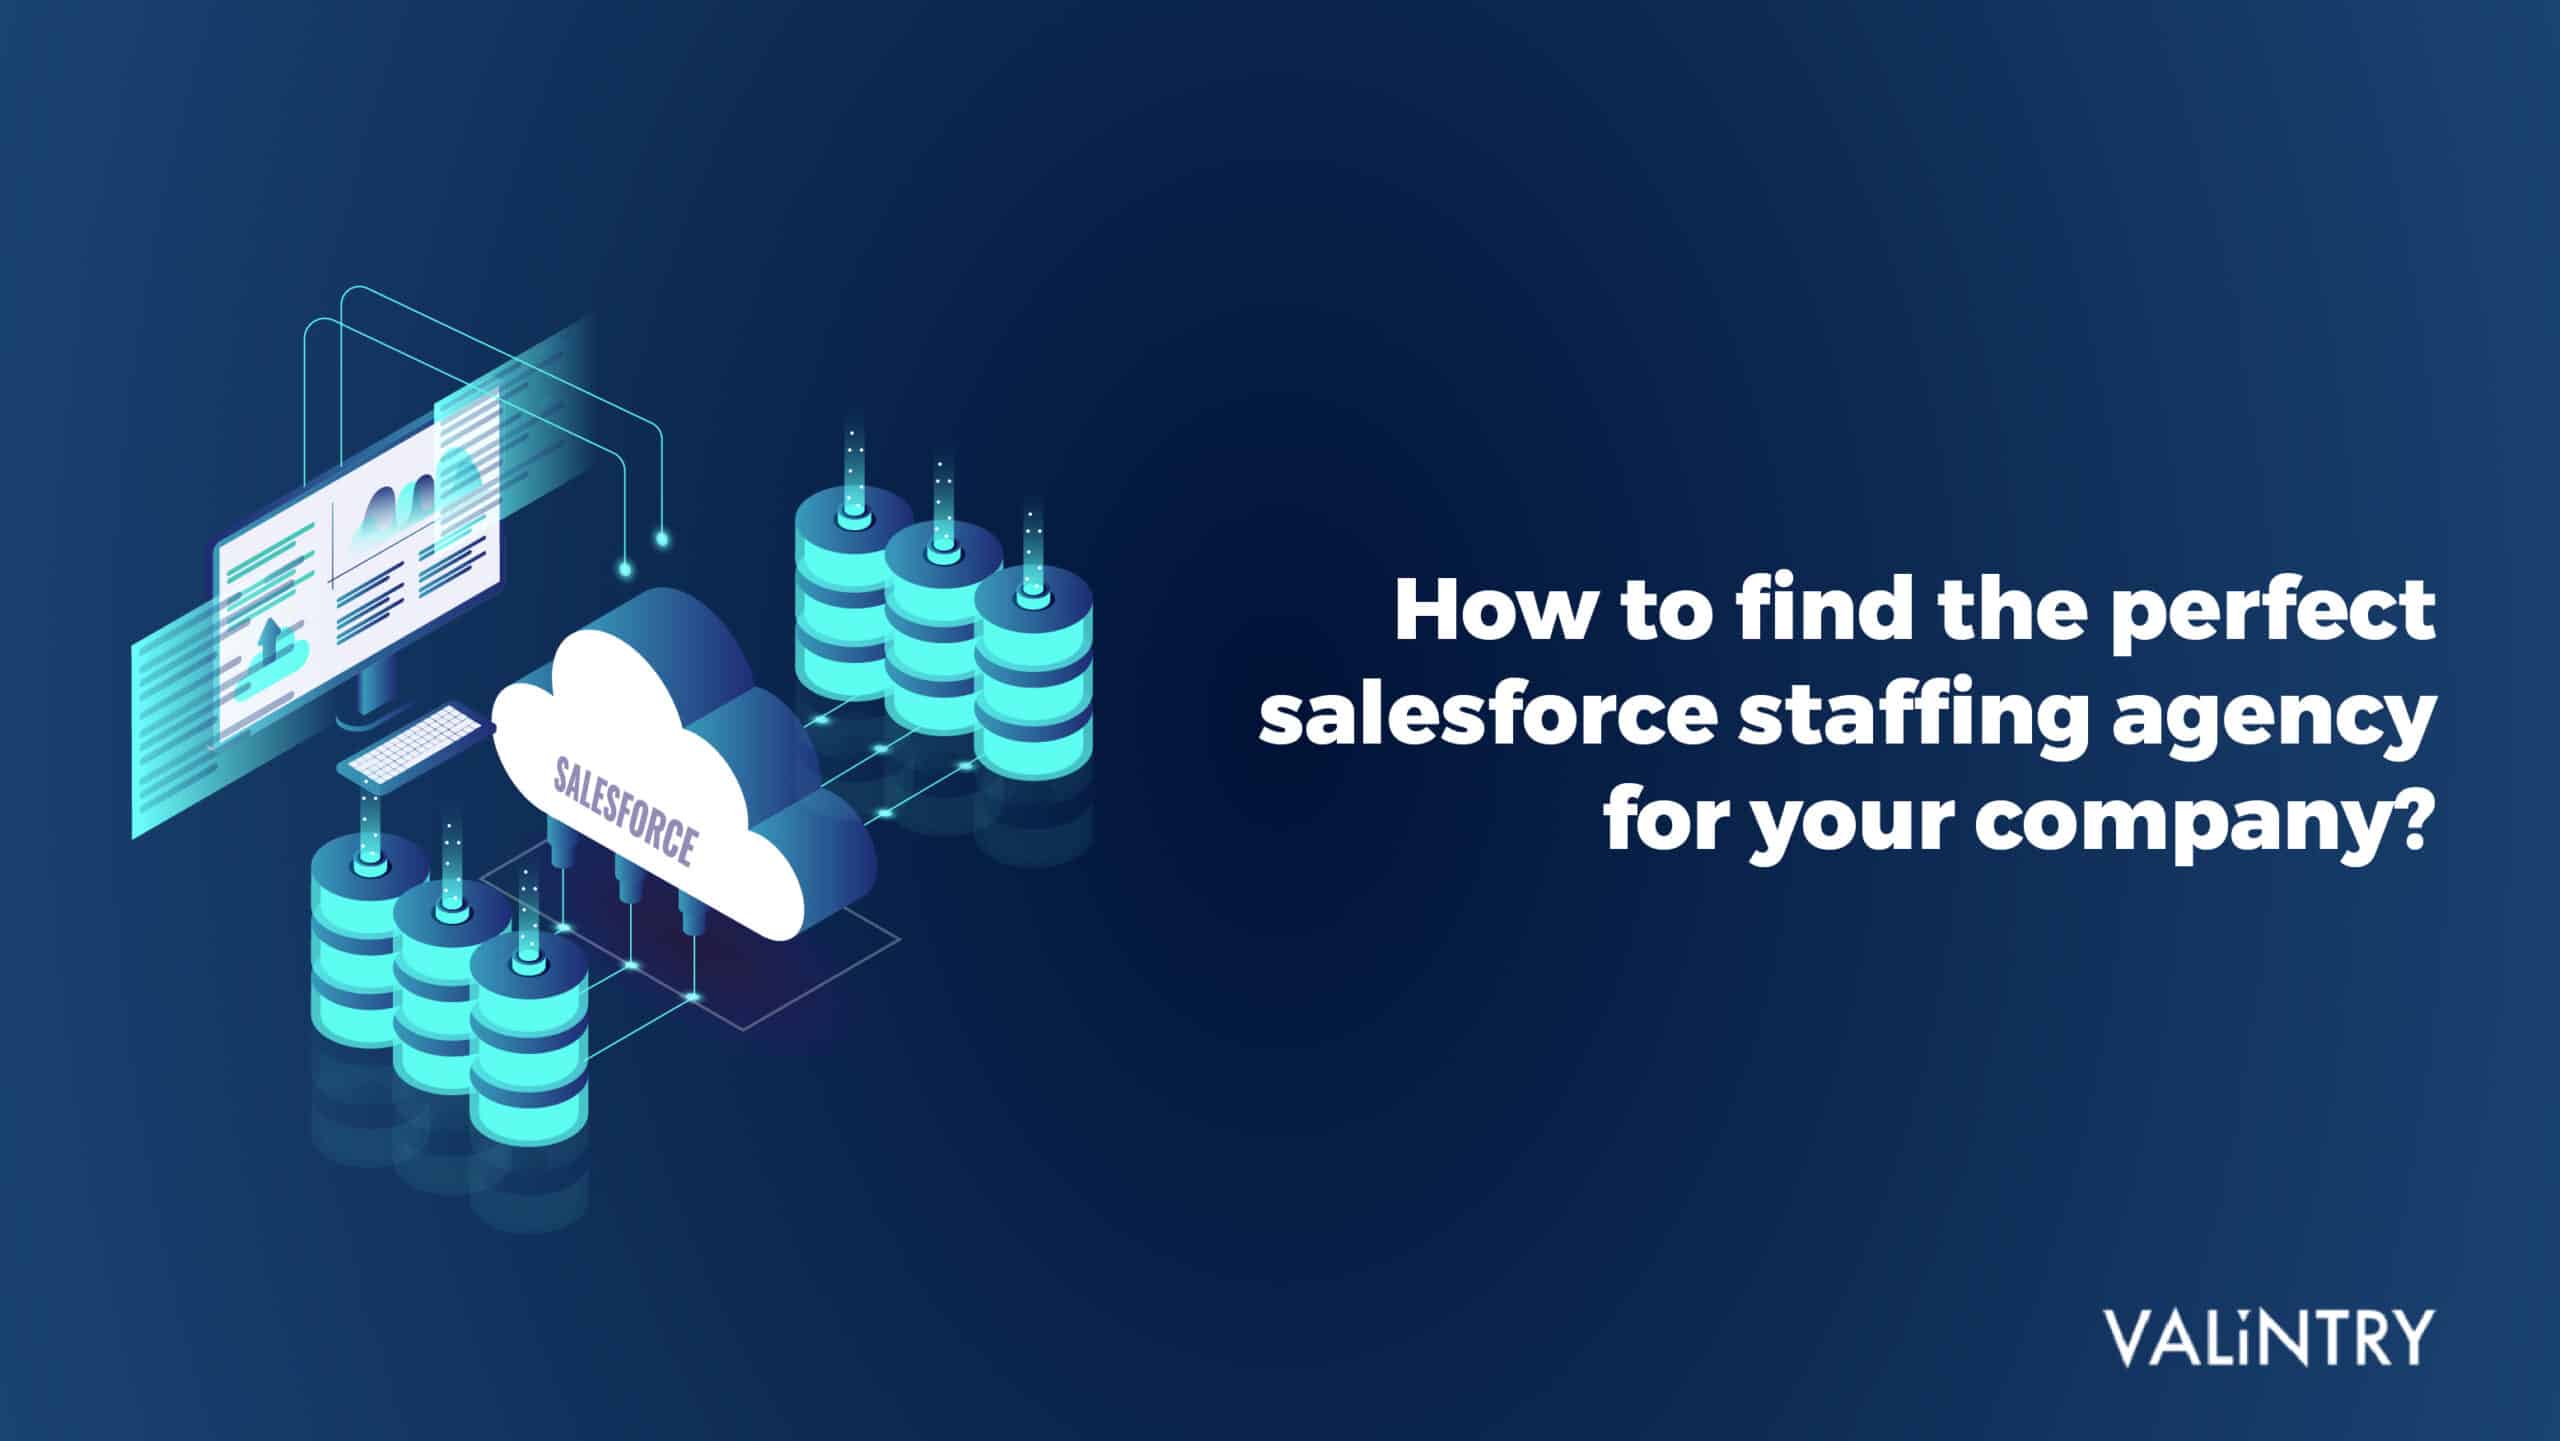 How to find salesforce staffing agency